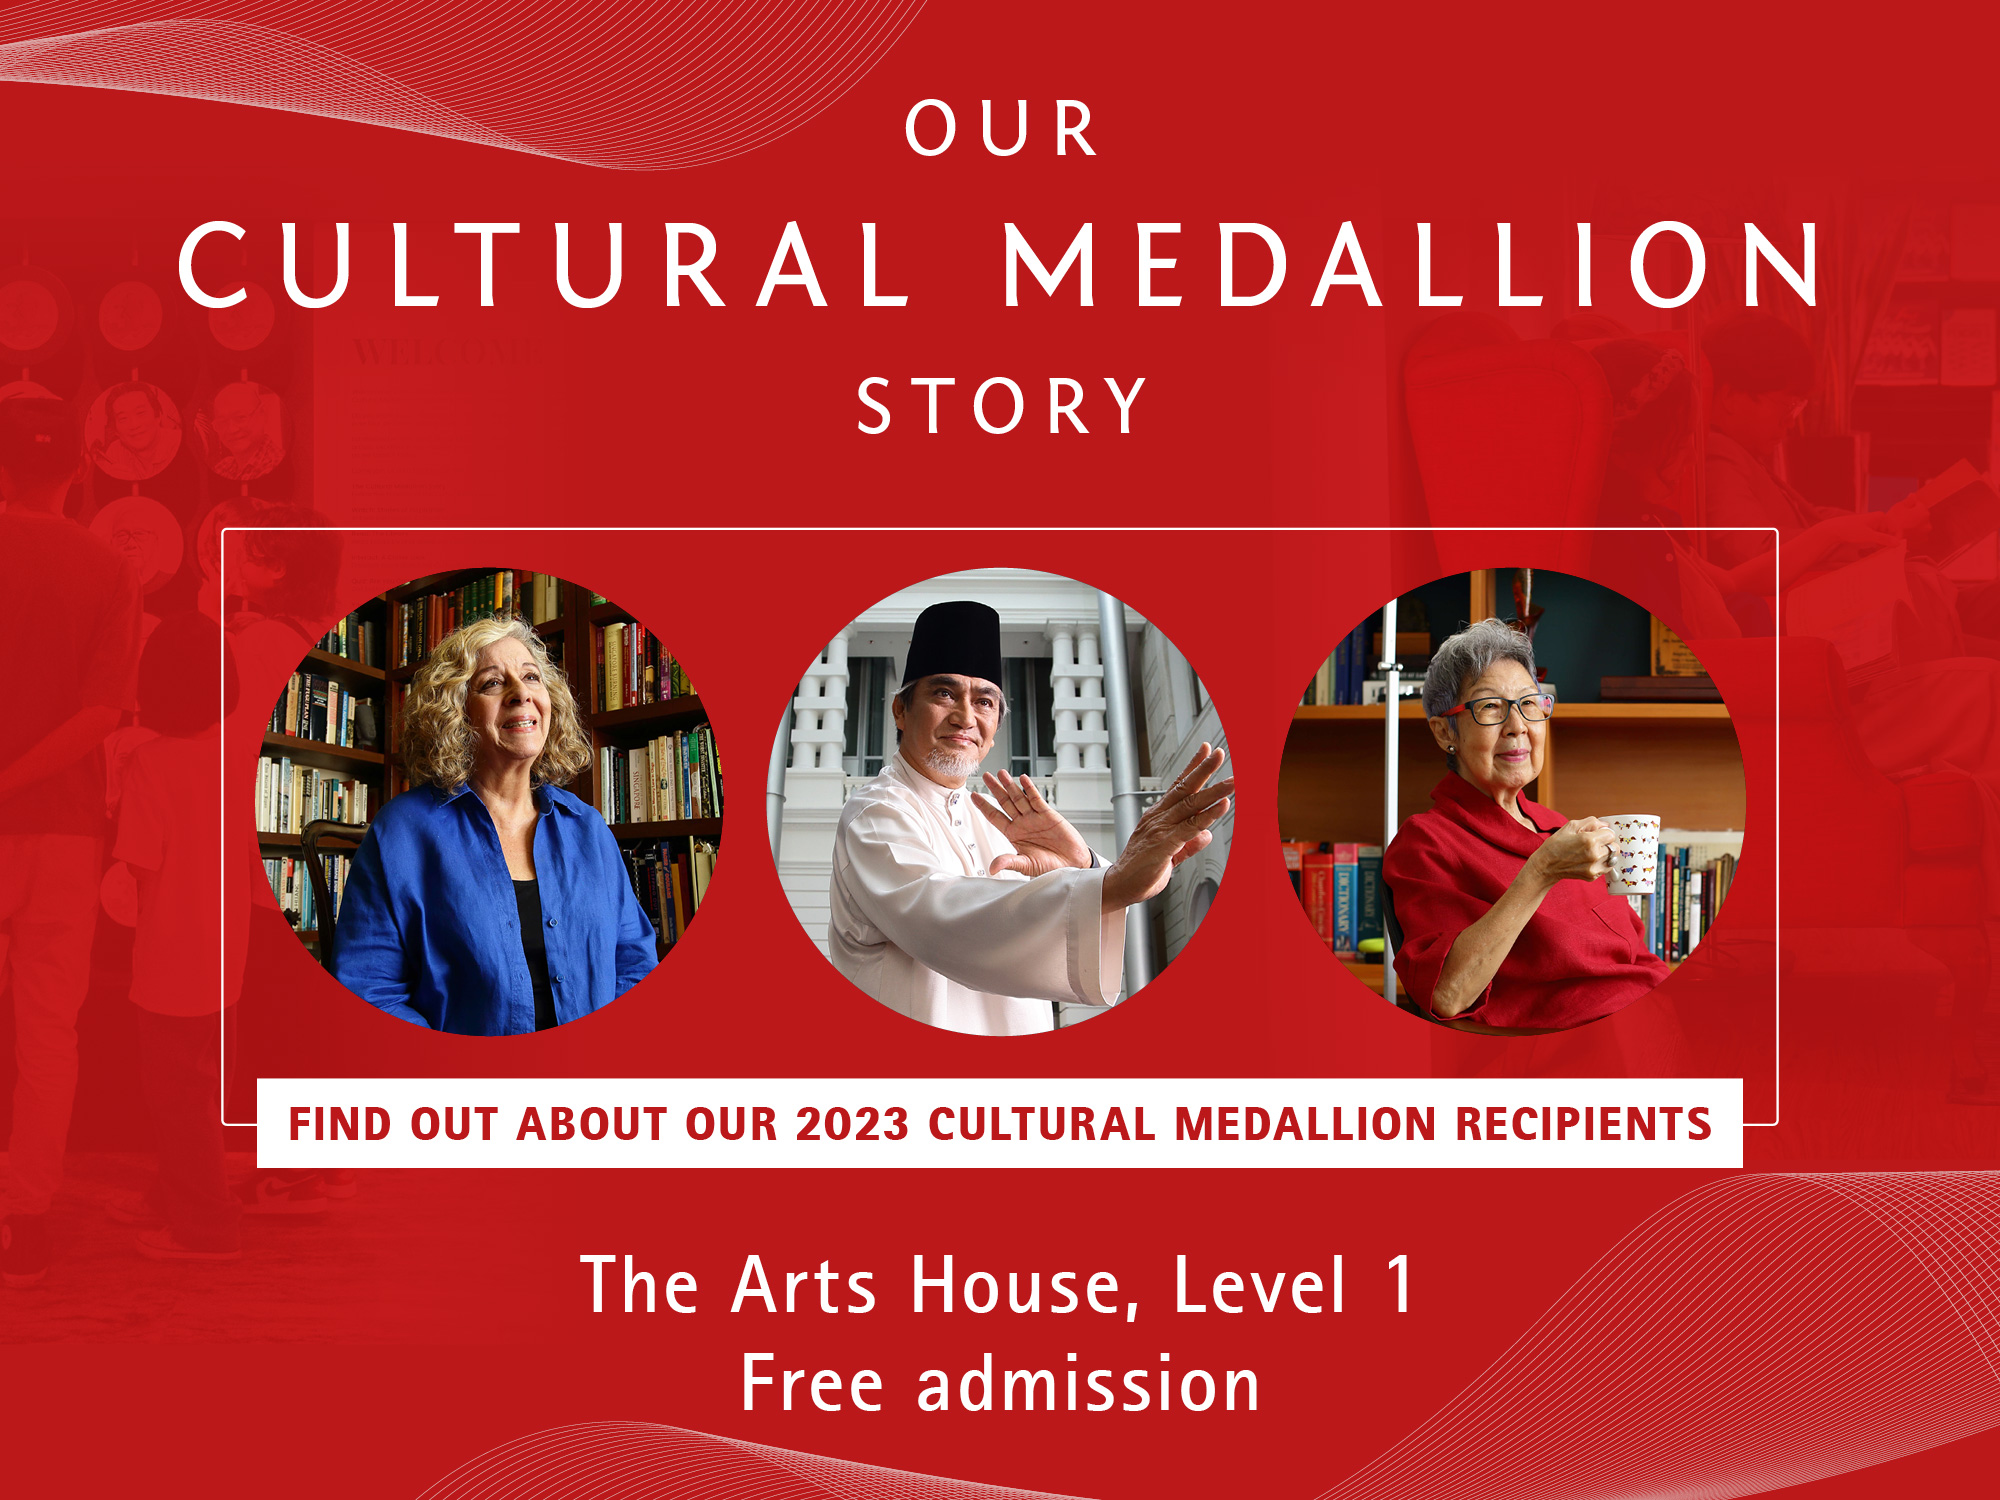 Our Cultural Medallion Story